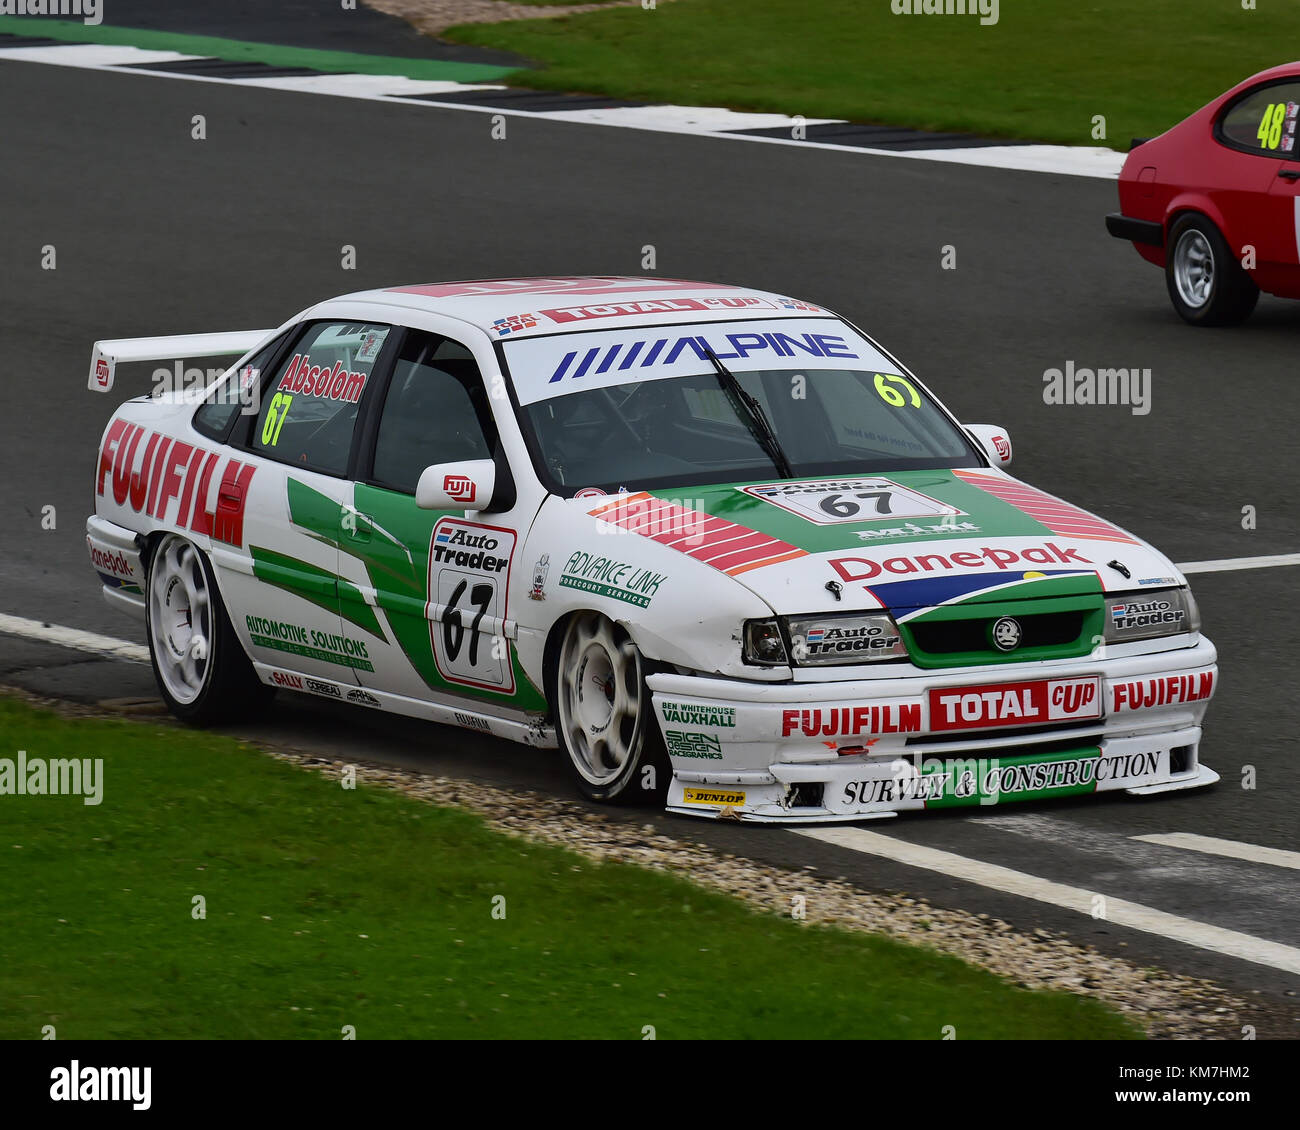 Tony Absolom, Vauxhall Cavalier, Super touring car trophy, Silverstone Classic, July 2017, Silverstone, 60's cars, circuit racing, cjm-photography, Cl Stock Photo